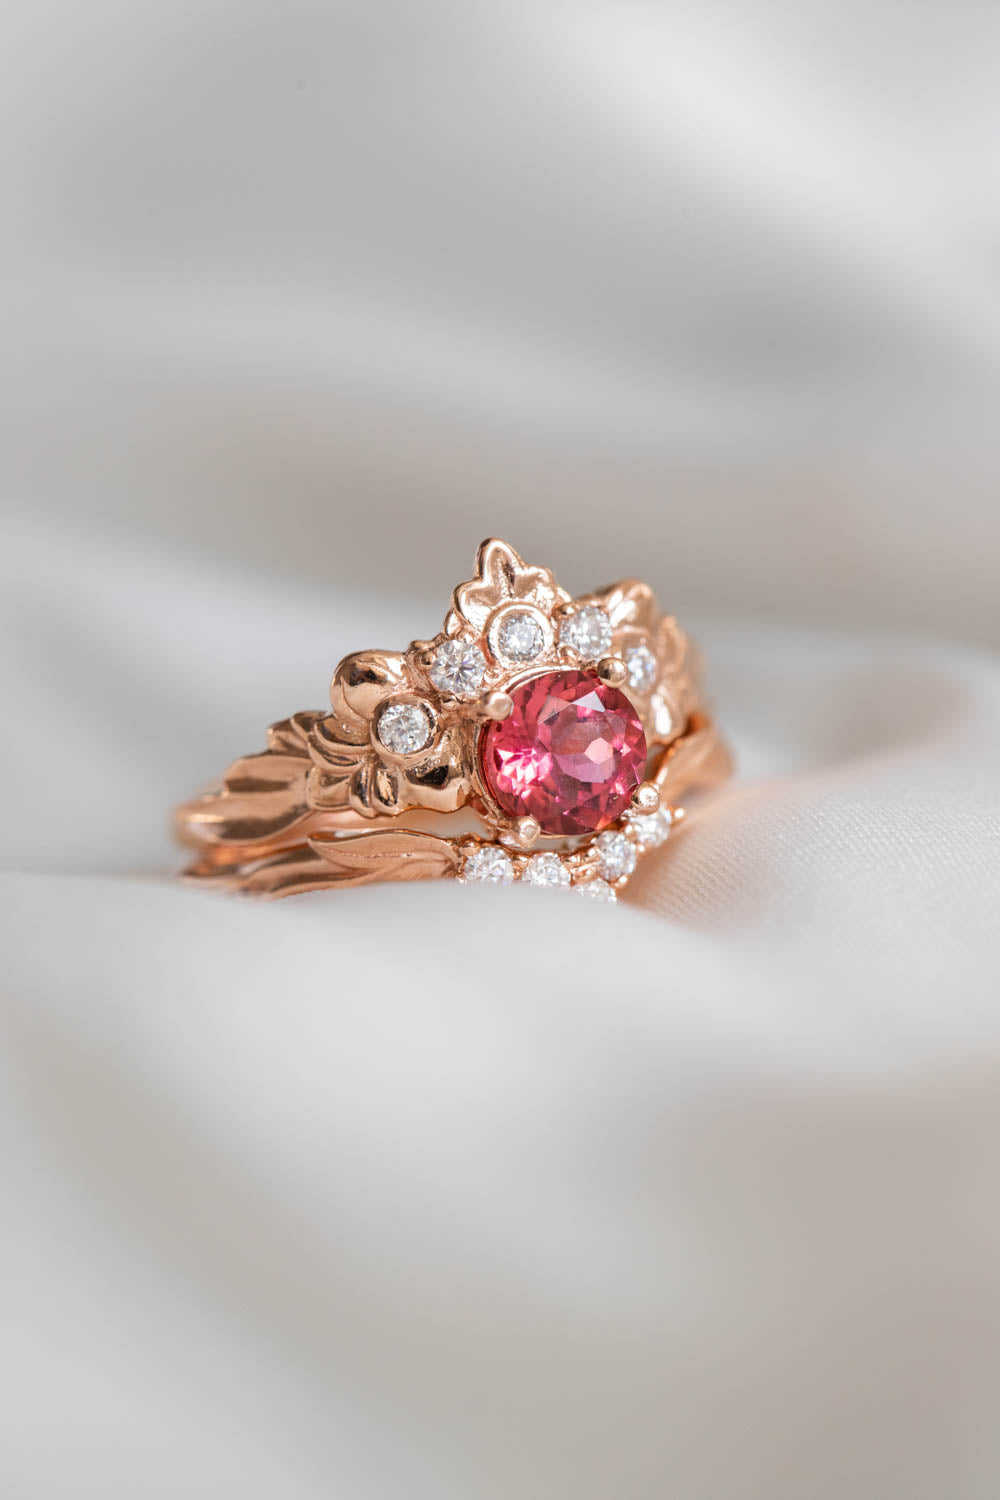 Flower crown engagement ring with pink tourmaline, botanic inspired diamond engagement ring /  Forget Me Not - Eden Garden Jewelry™